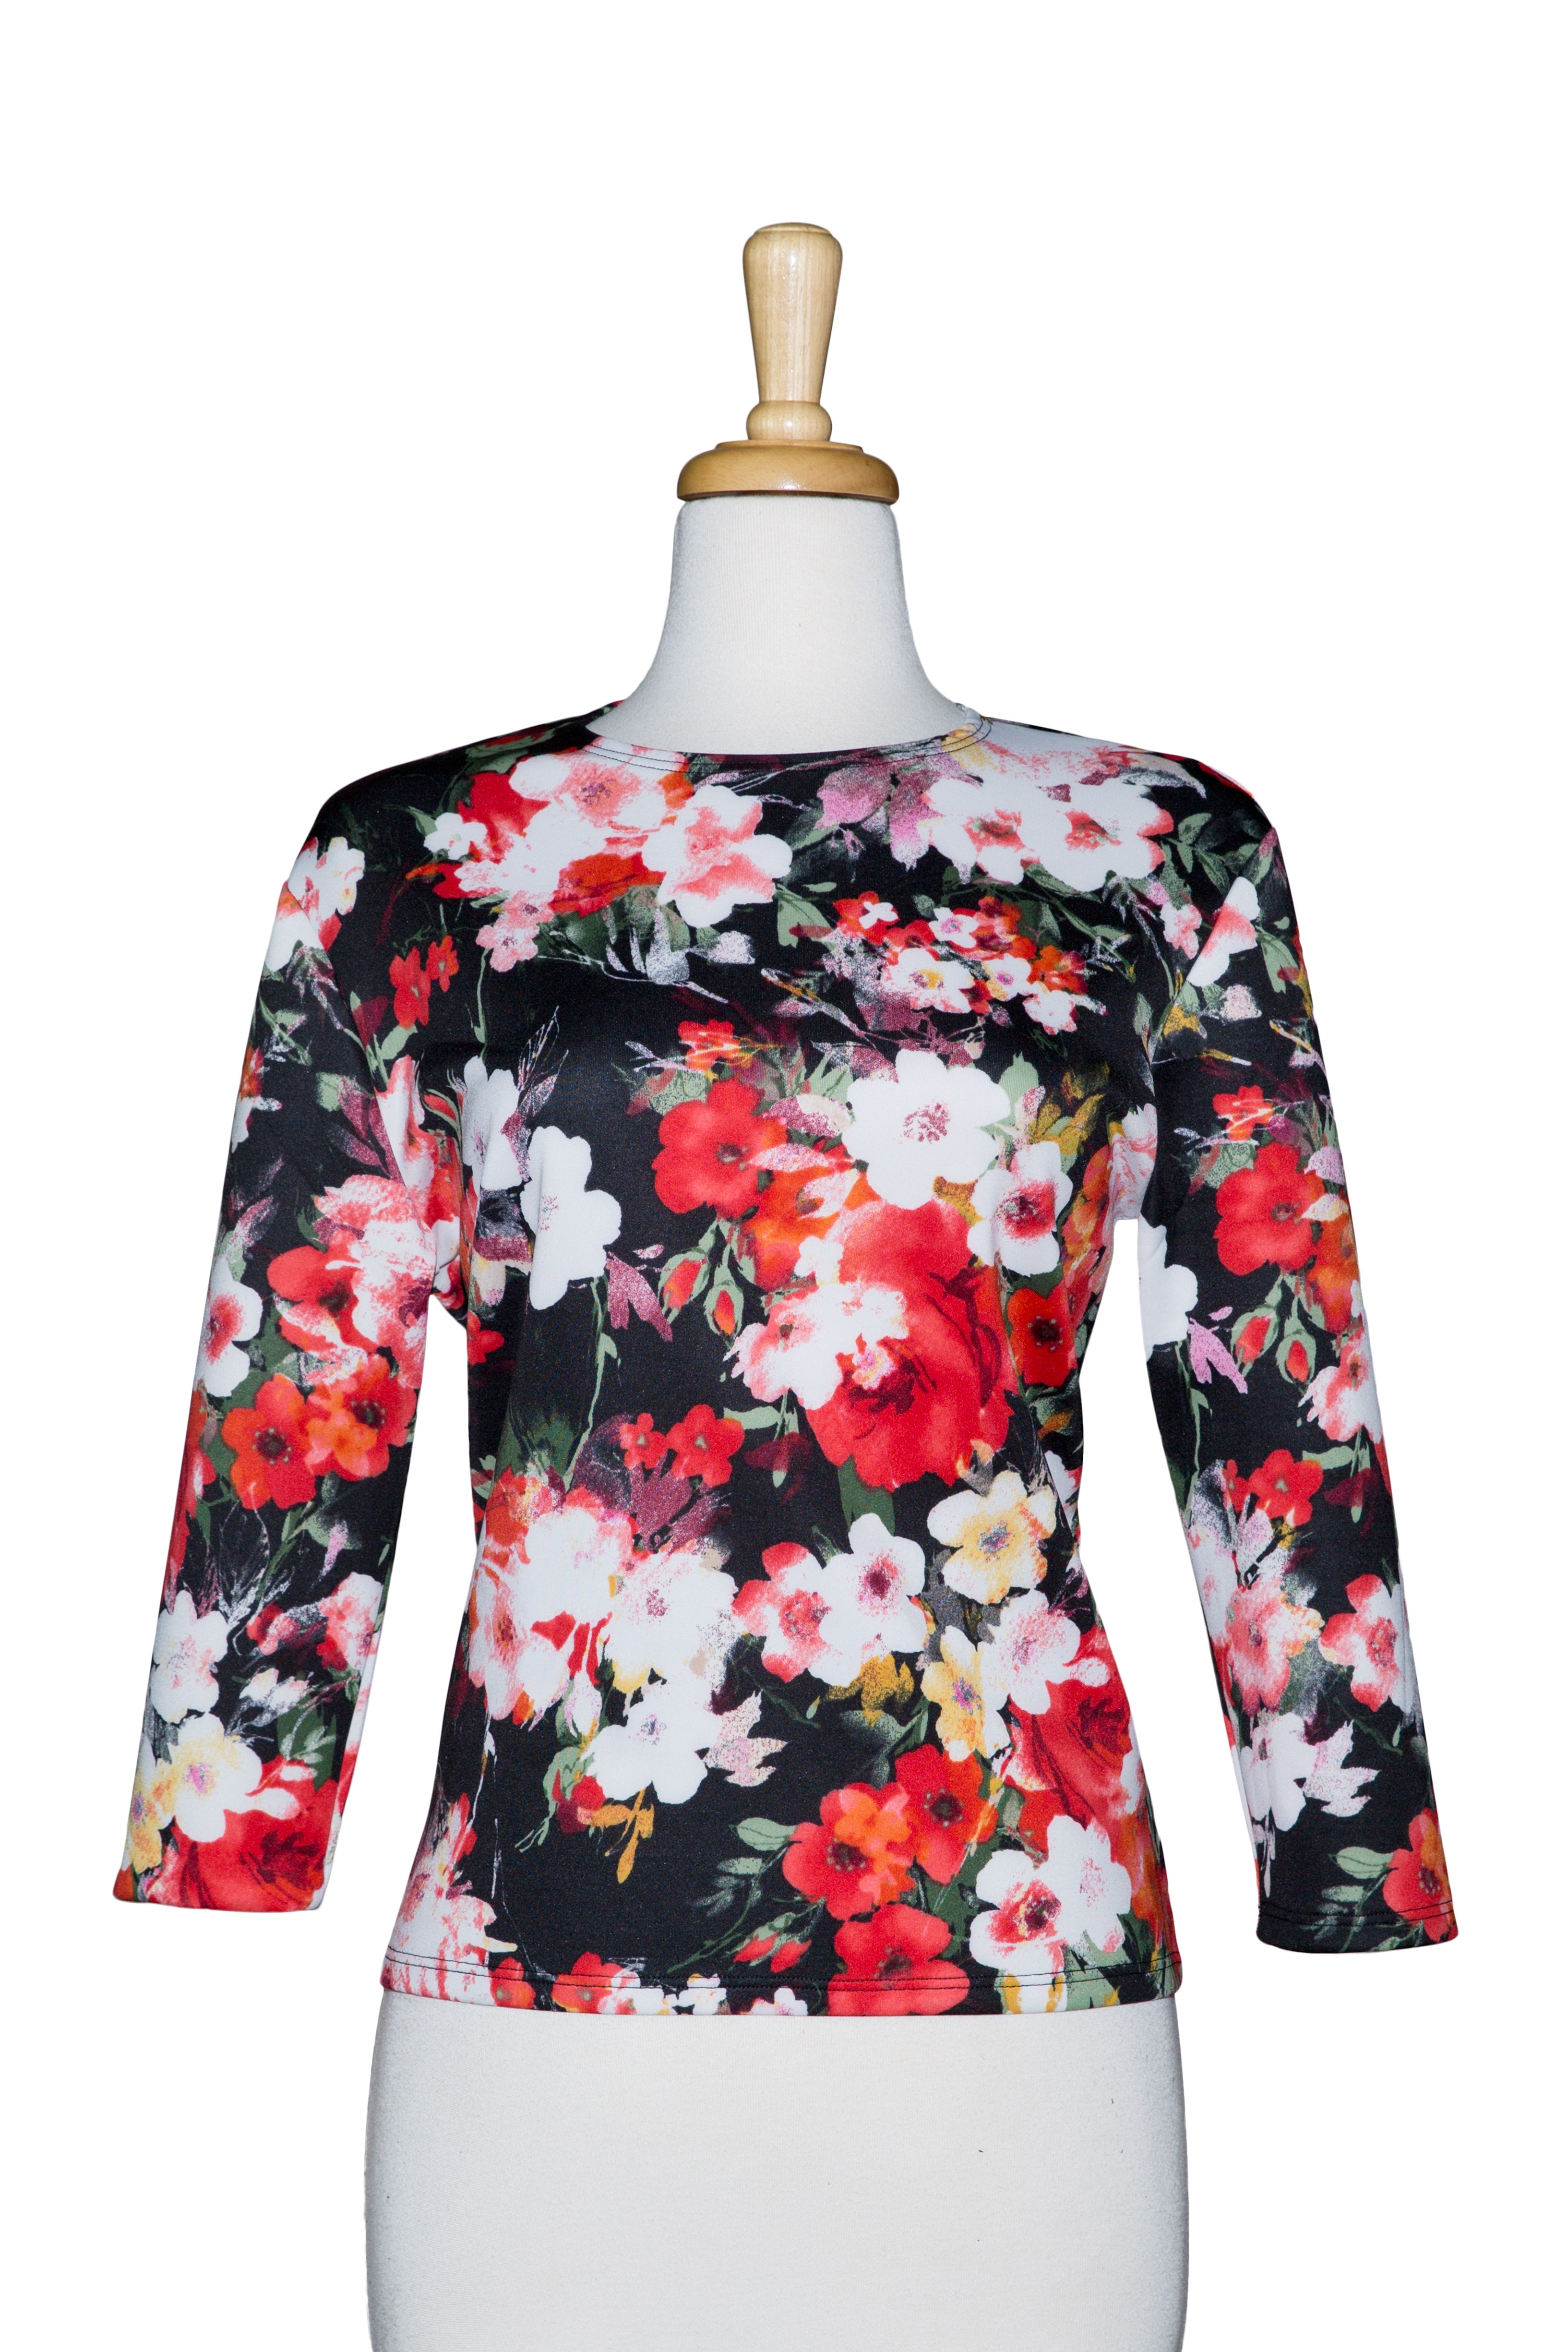 Plus Size Black Red and White Floral Light Scuba Knit 3/4 Sleeve Top 